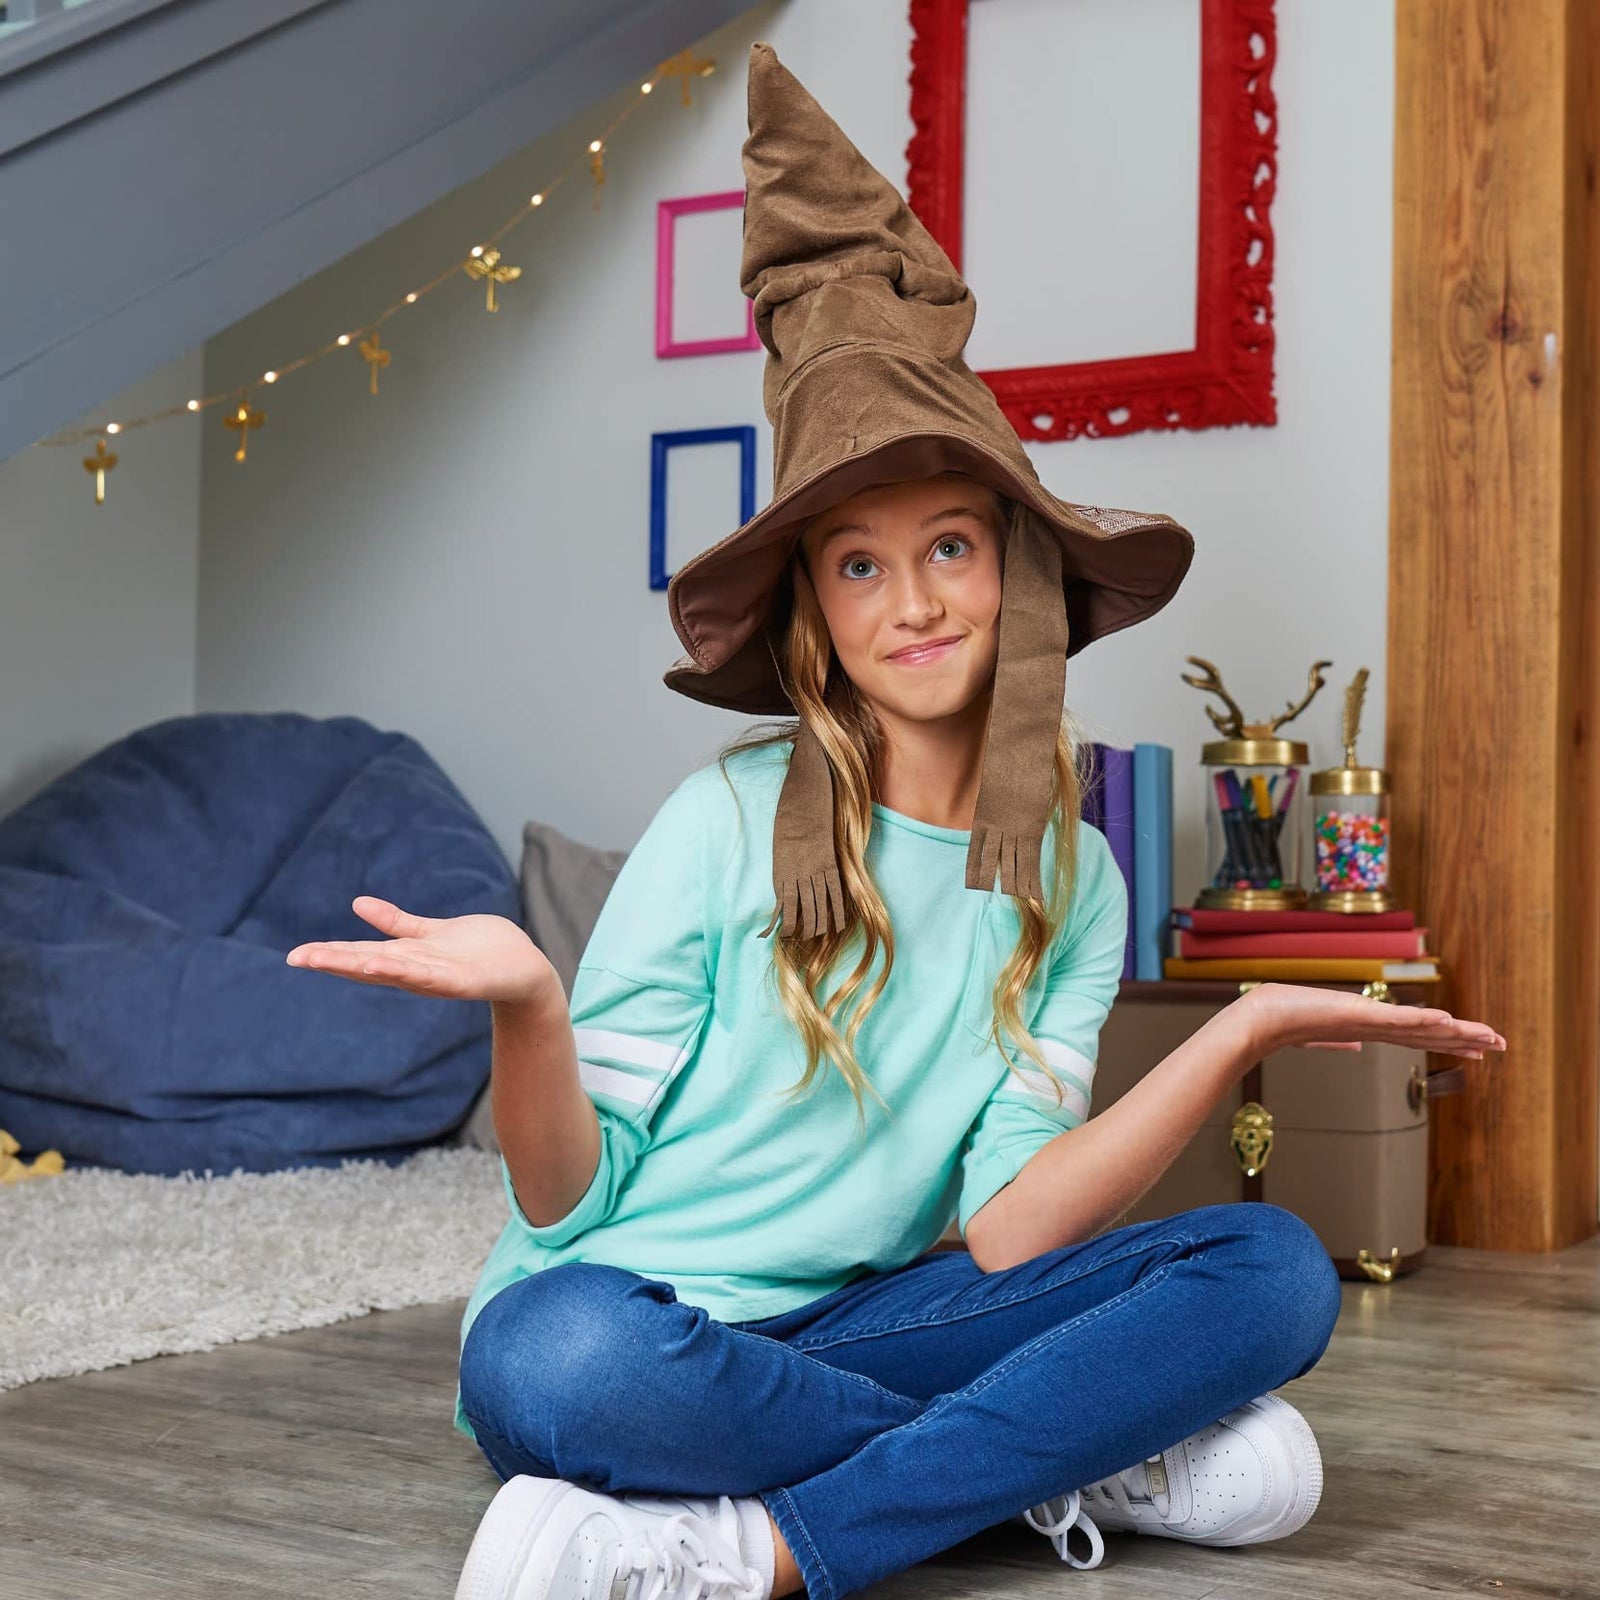 Wizarding World Harry Potter, Talking Sorting Hat with 15 Phrases for Pretend Play, Kids Toys for Ages 5 and up